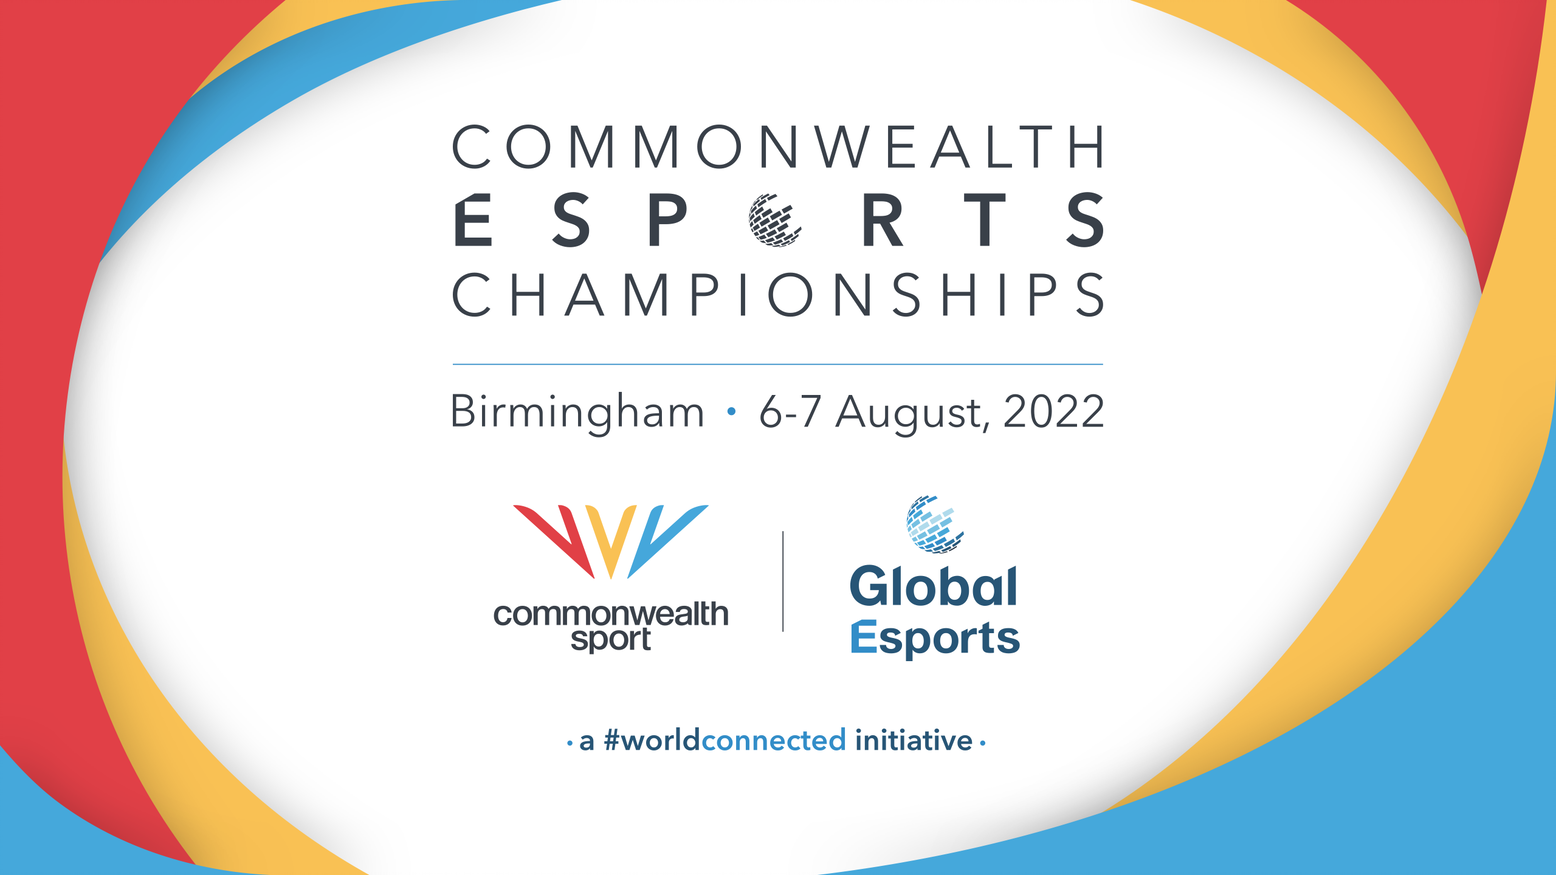 First Commonwealth Esports Championships to be held at same time as Birmingham 2022